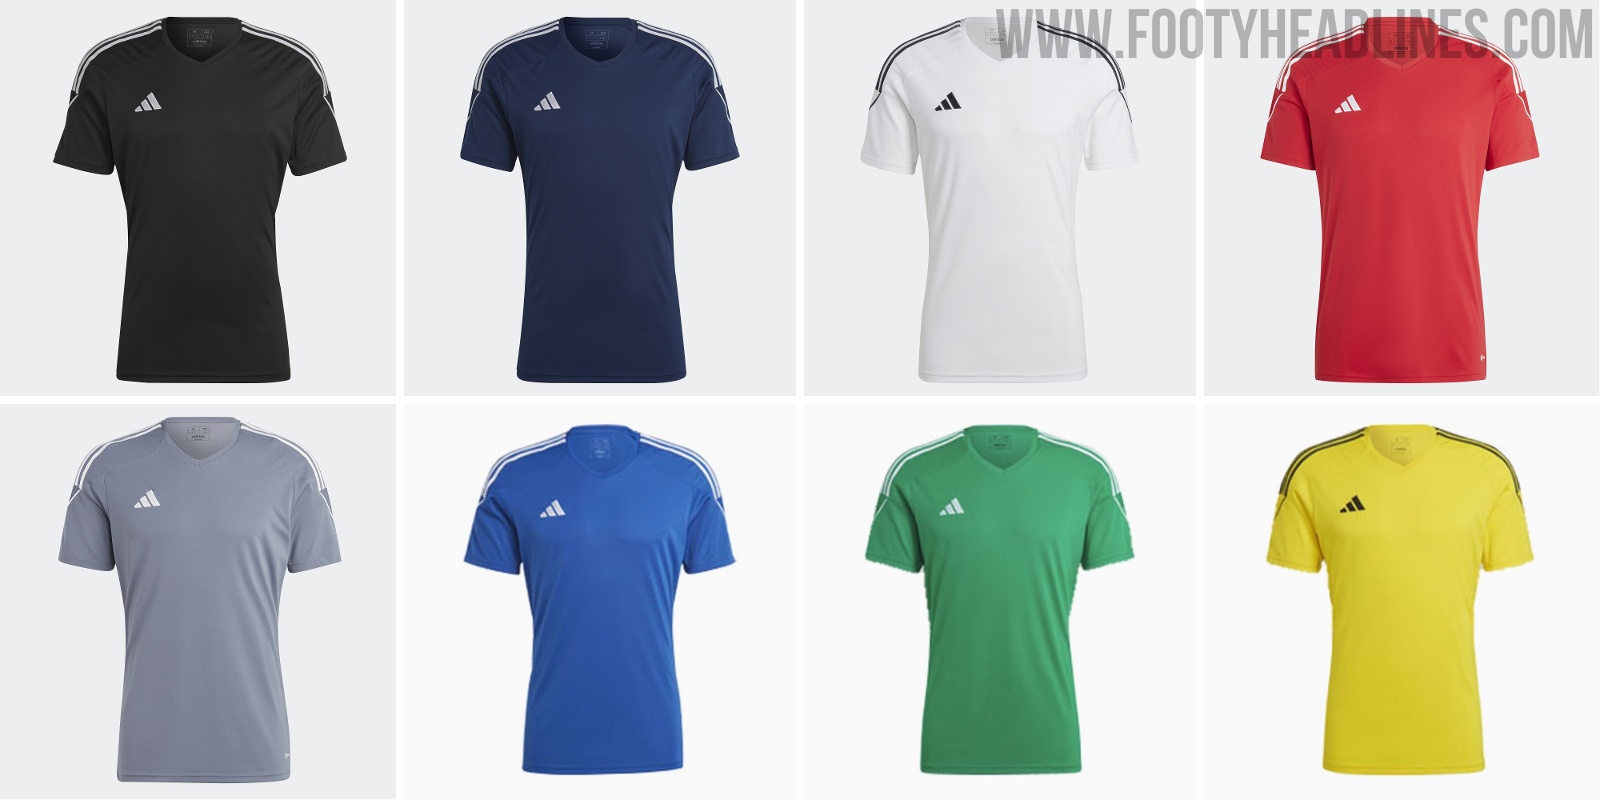 Adidas 202324 Teamwear Overview To Be Worn By Many Teams Footy